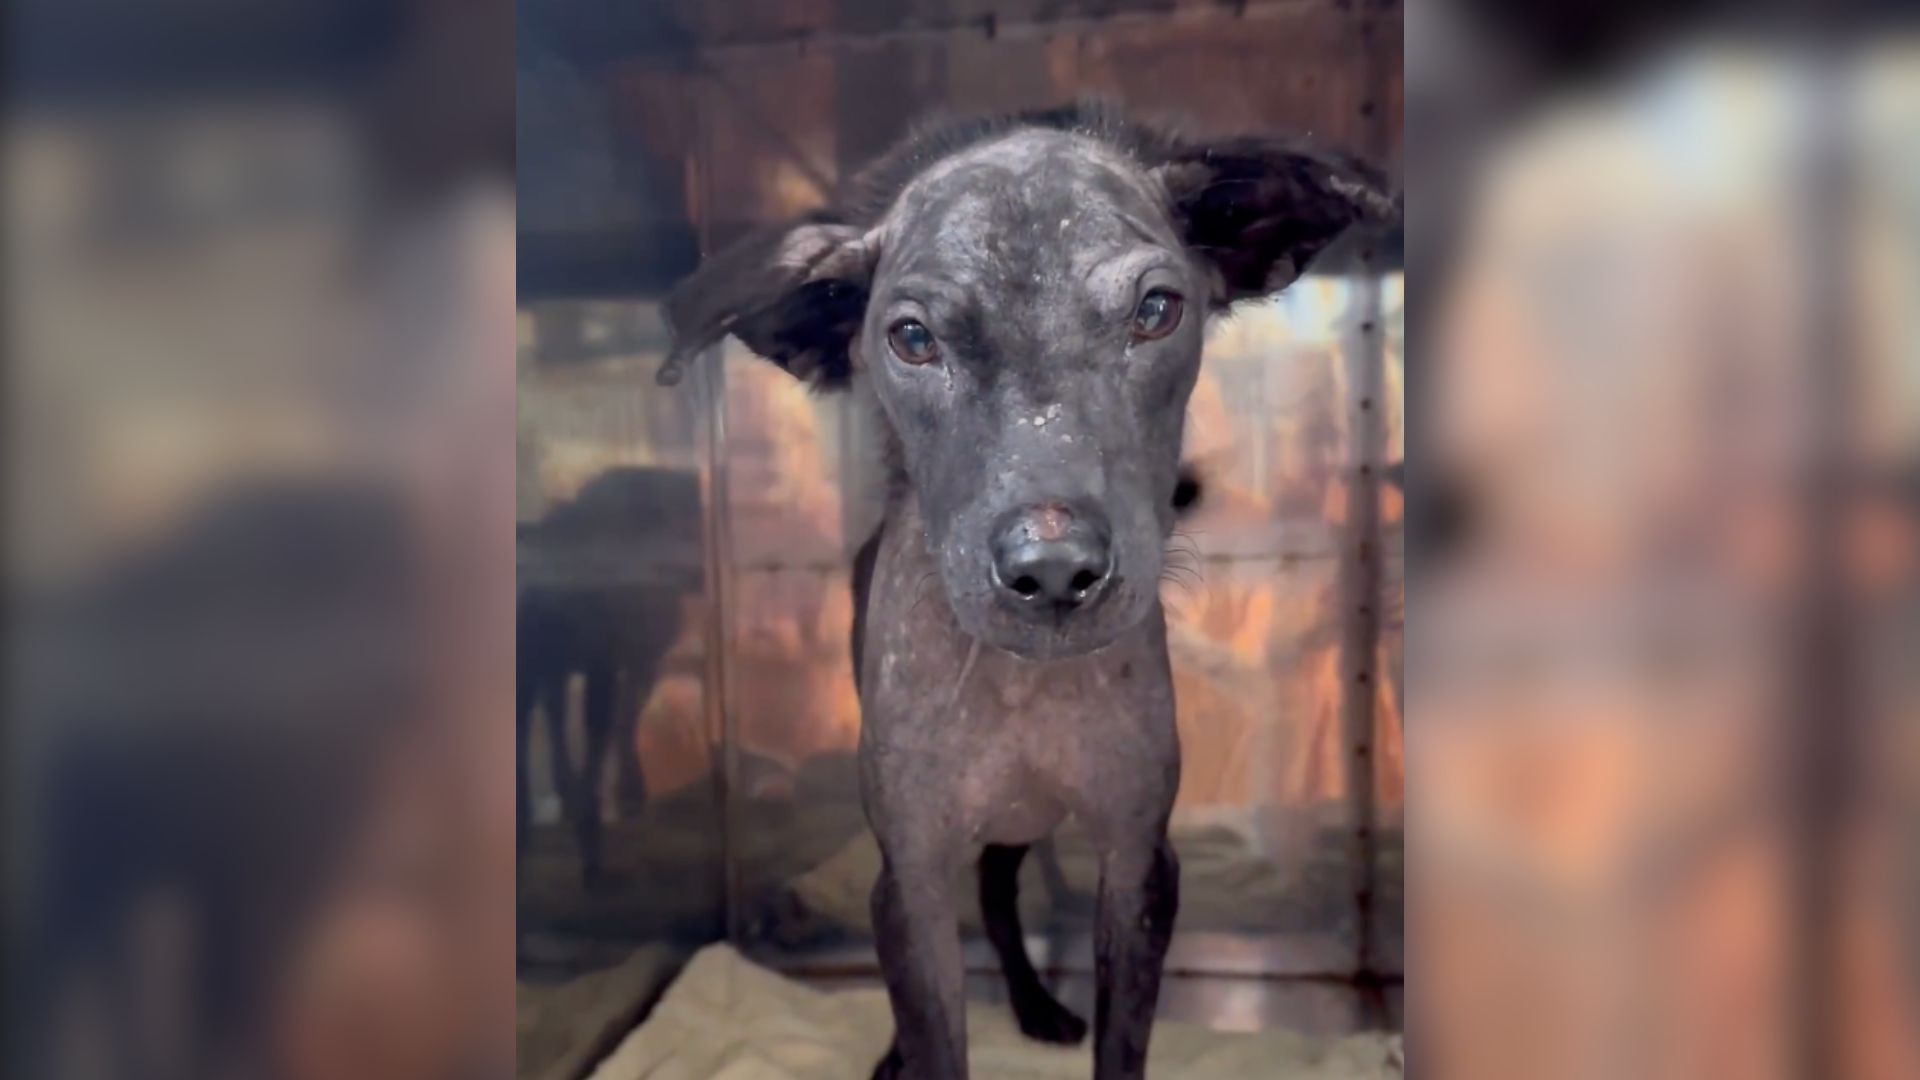 Heartbroken Pup Was About To Leave This World In Pain, Then A Miracle Happens